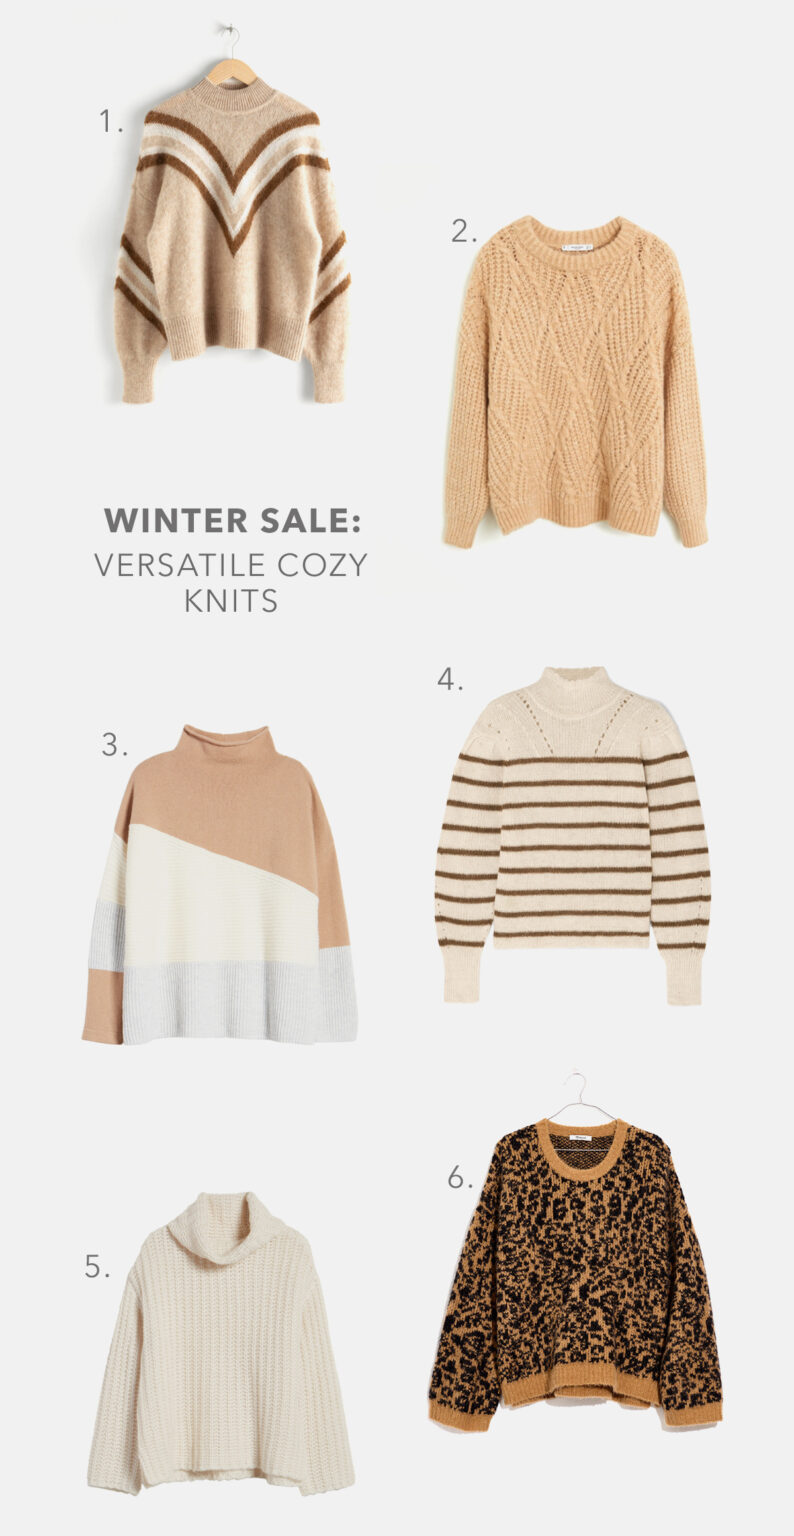 Best Winter Sales: Stock Up on Timeless Classics! - Anne Sage